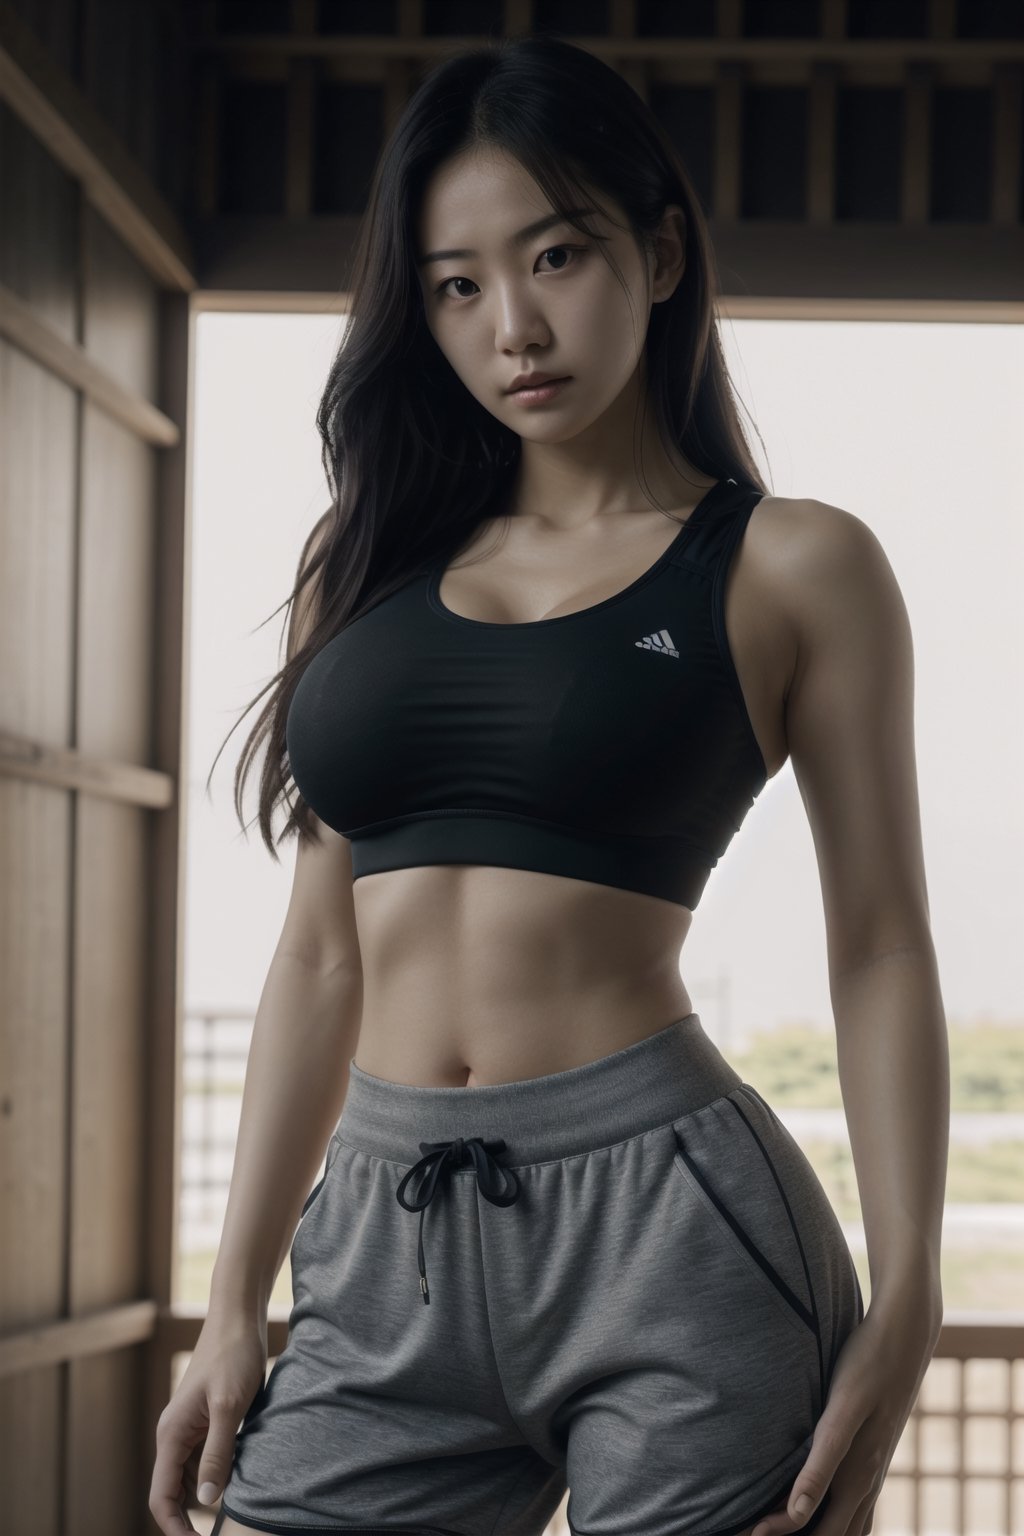 ((Masterpiece)),((Ultra Best quality)),Photorealistic,8k raw photo,((Hyperdetailed)),1Korean Girl,((Any Pose)).Beautiful Face,oversized Black Sports bra and black jogger,oversized Black sports bra and black jogger,blurry_light_background, ((Medium Round Boobs)), detailed, perfect body, perfect hand,thick thigh,japanese girl,looking at the viewer,background landscape,Long hair,thigh exposure,perfect hands,best lighting,natural light,HDR

